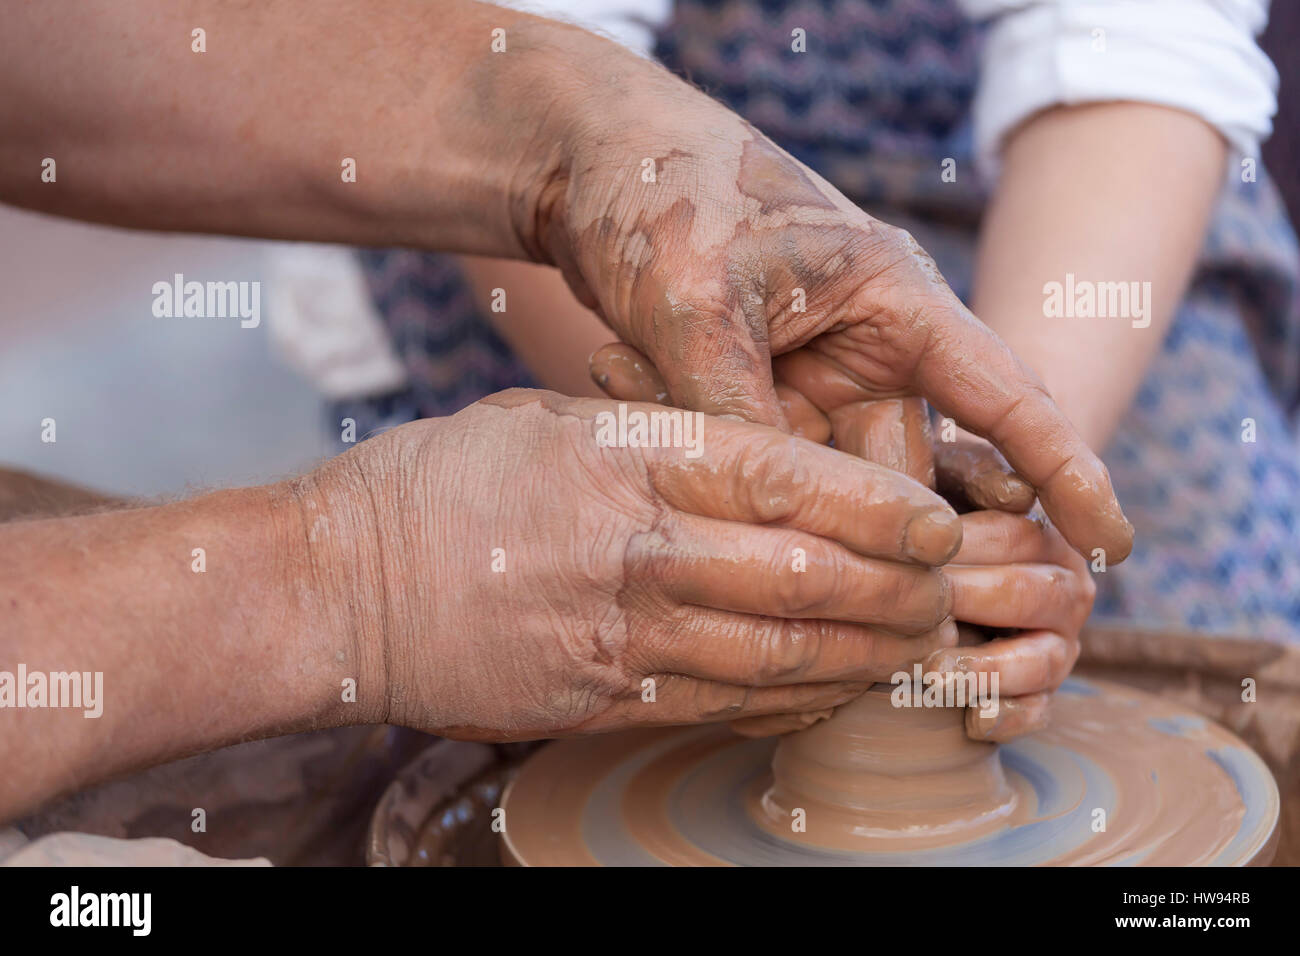 Pottery making, close up on hands Stock Photo